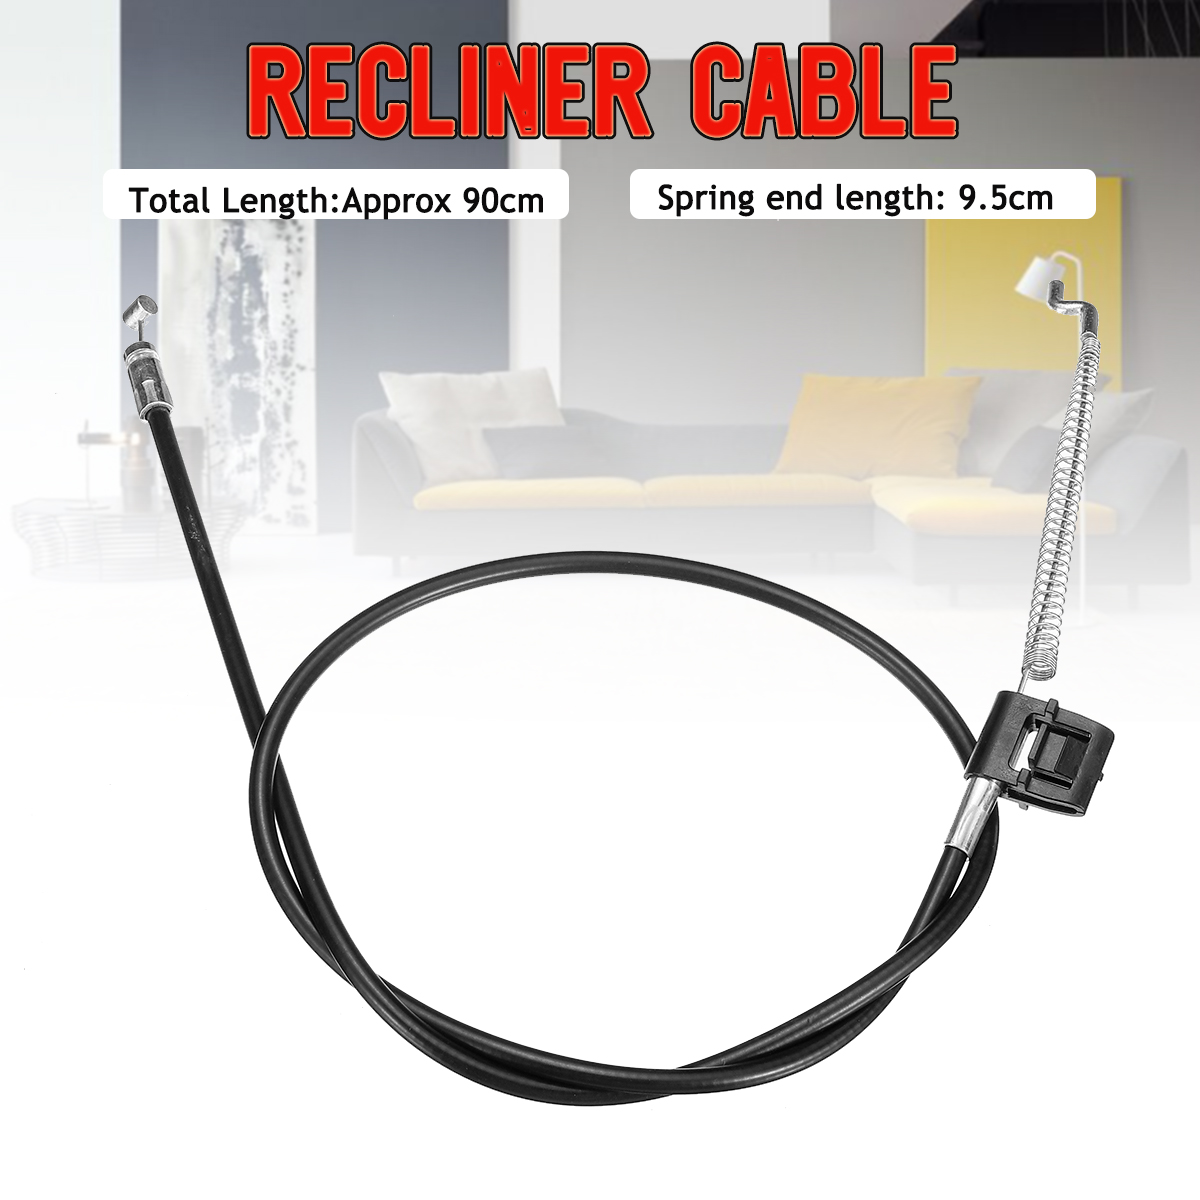 90cm-Recliner-Handle-Release-Cable-Replacement-Accessories-Chair-Lever-Trigger-Cable-Sofa-Lounge-1476795-1